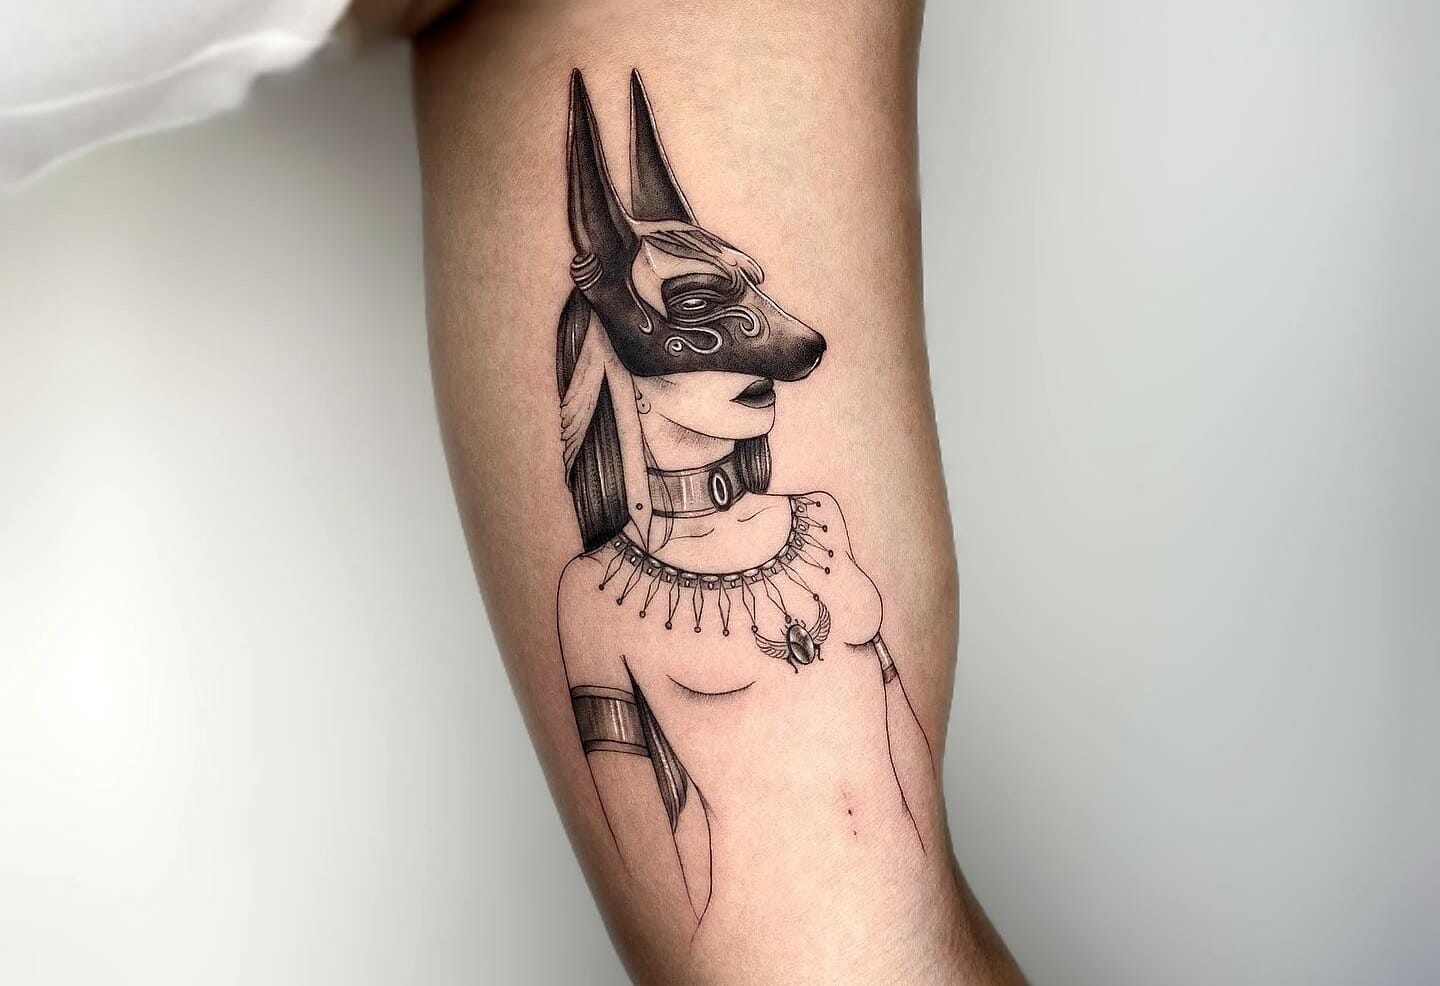 Tattoo of powerful and enigmatic Egyptian letters | tattoos